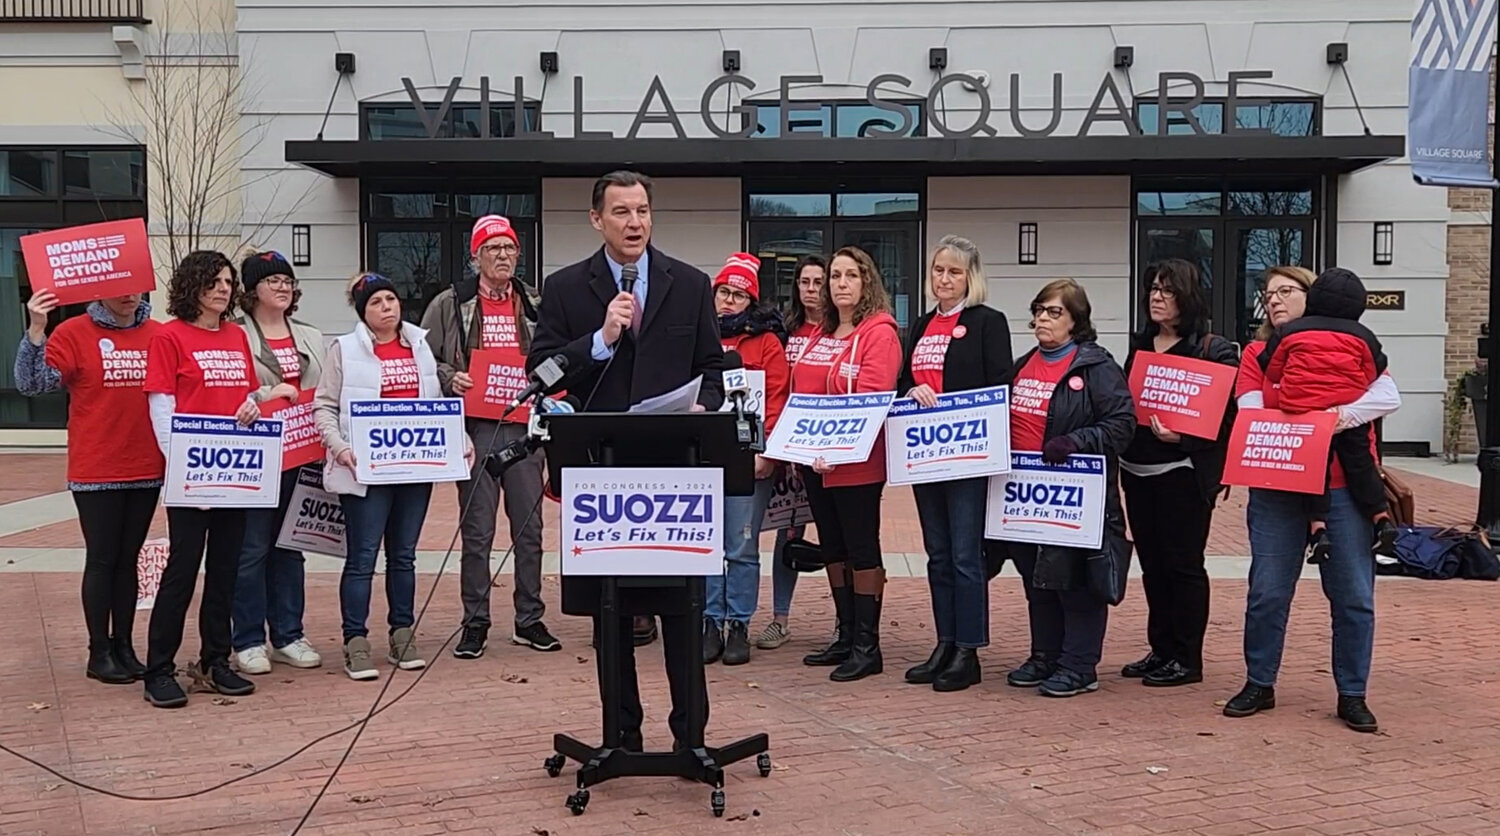 Tom Suozzi says he’s against the use of semi-automatic weapons.